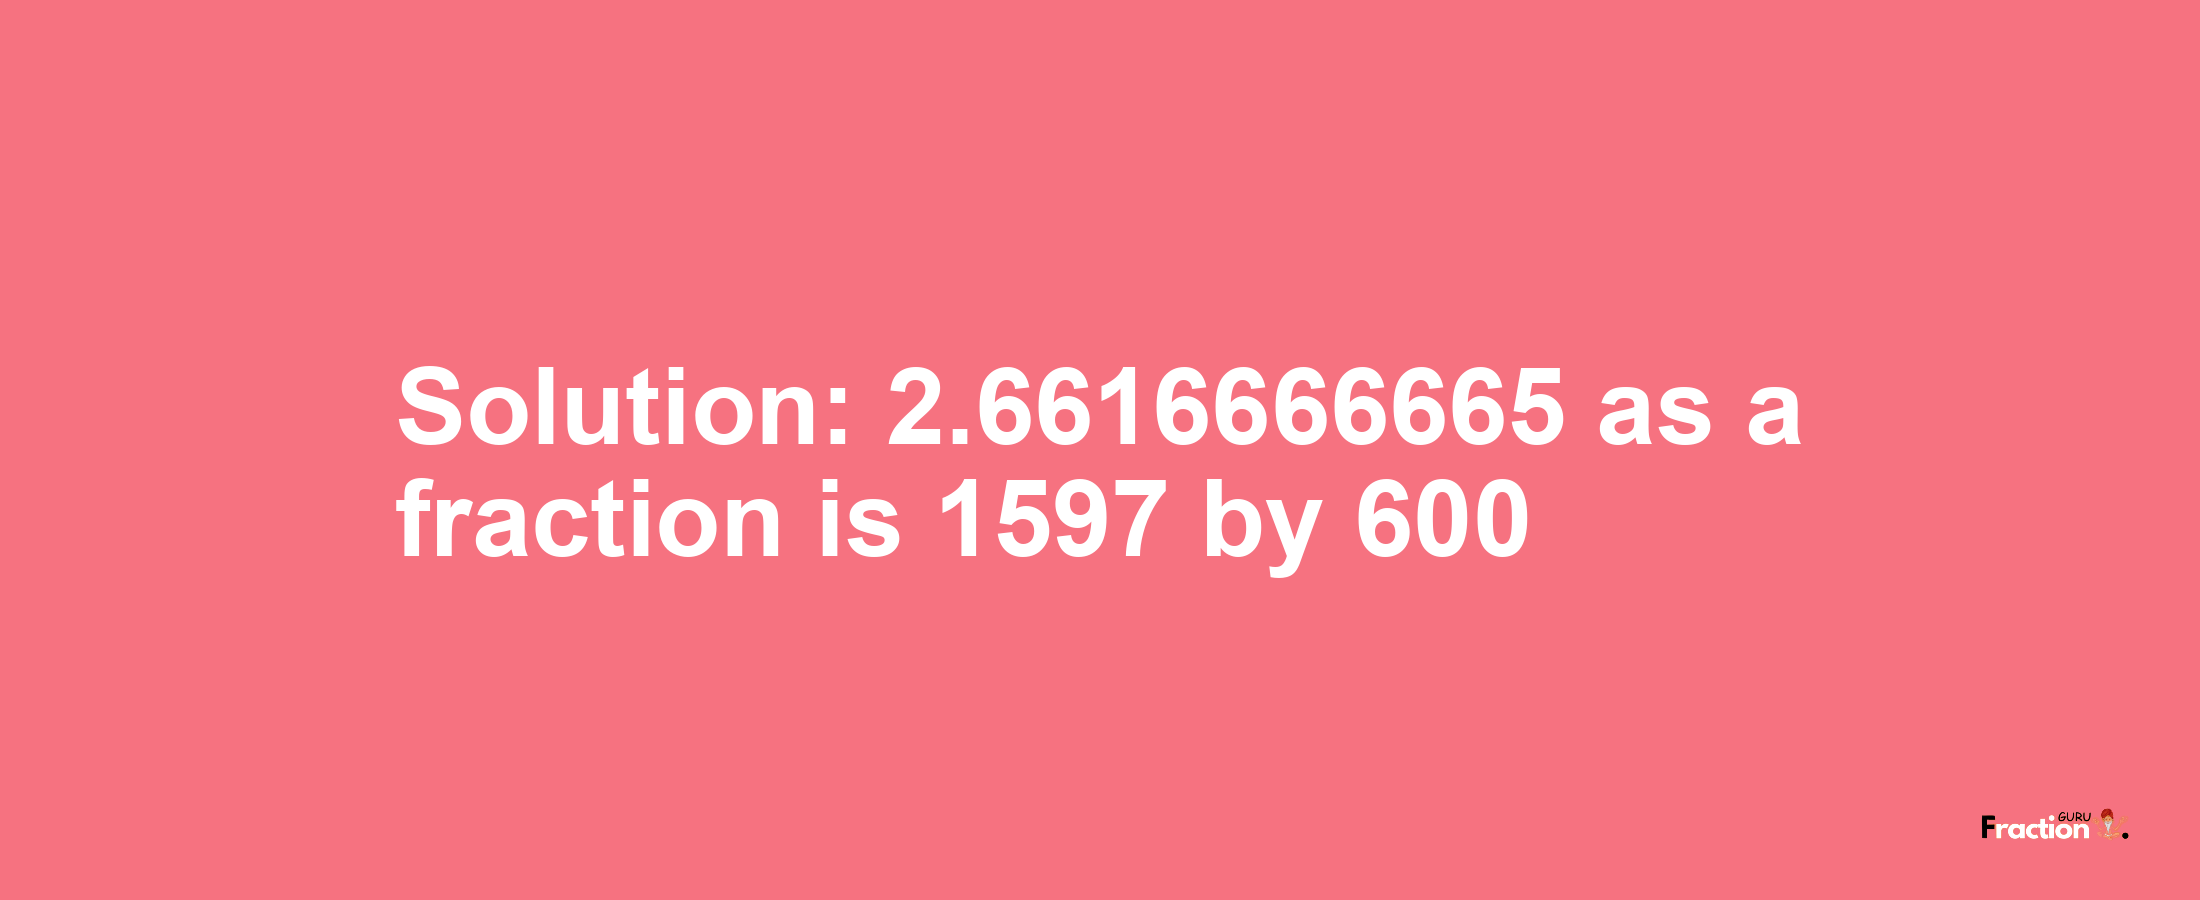 Solution:2.6616666665 as a fraction is 1597/600